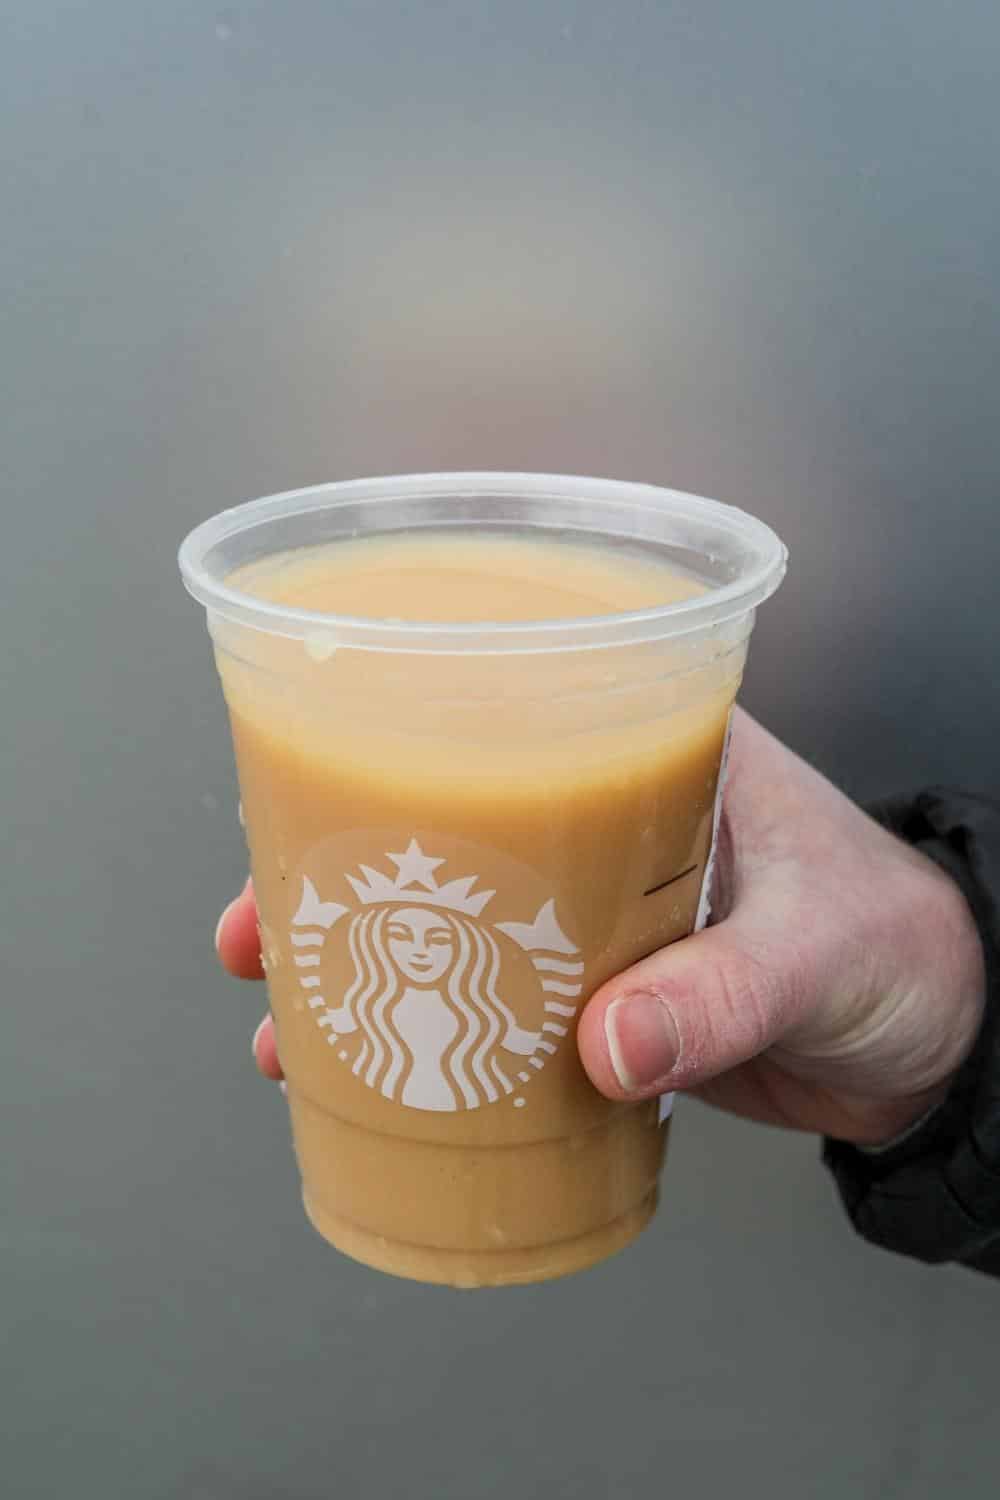 Hand holding a clear cup of Starbucks iced London fog tea latte.